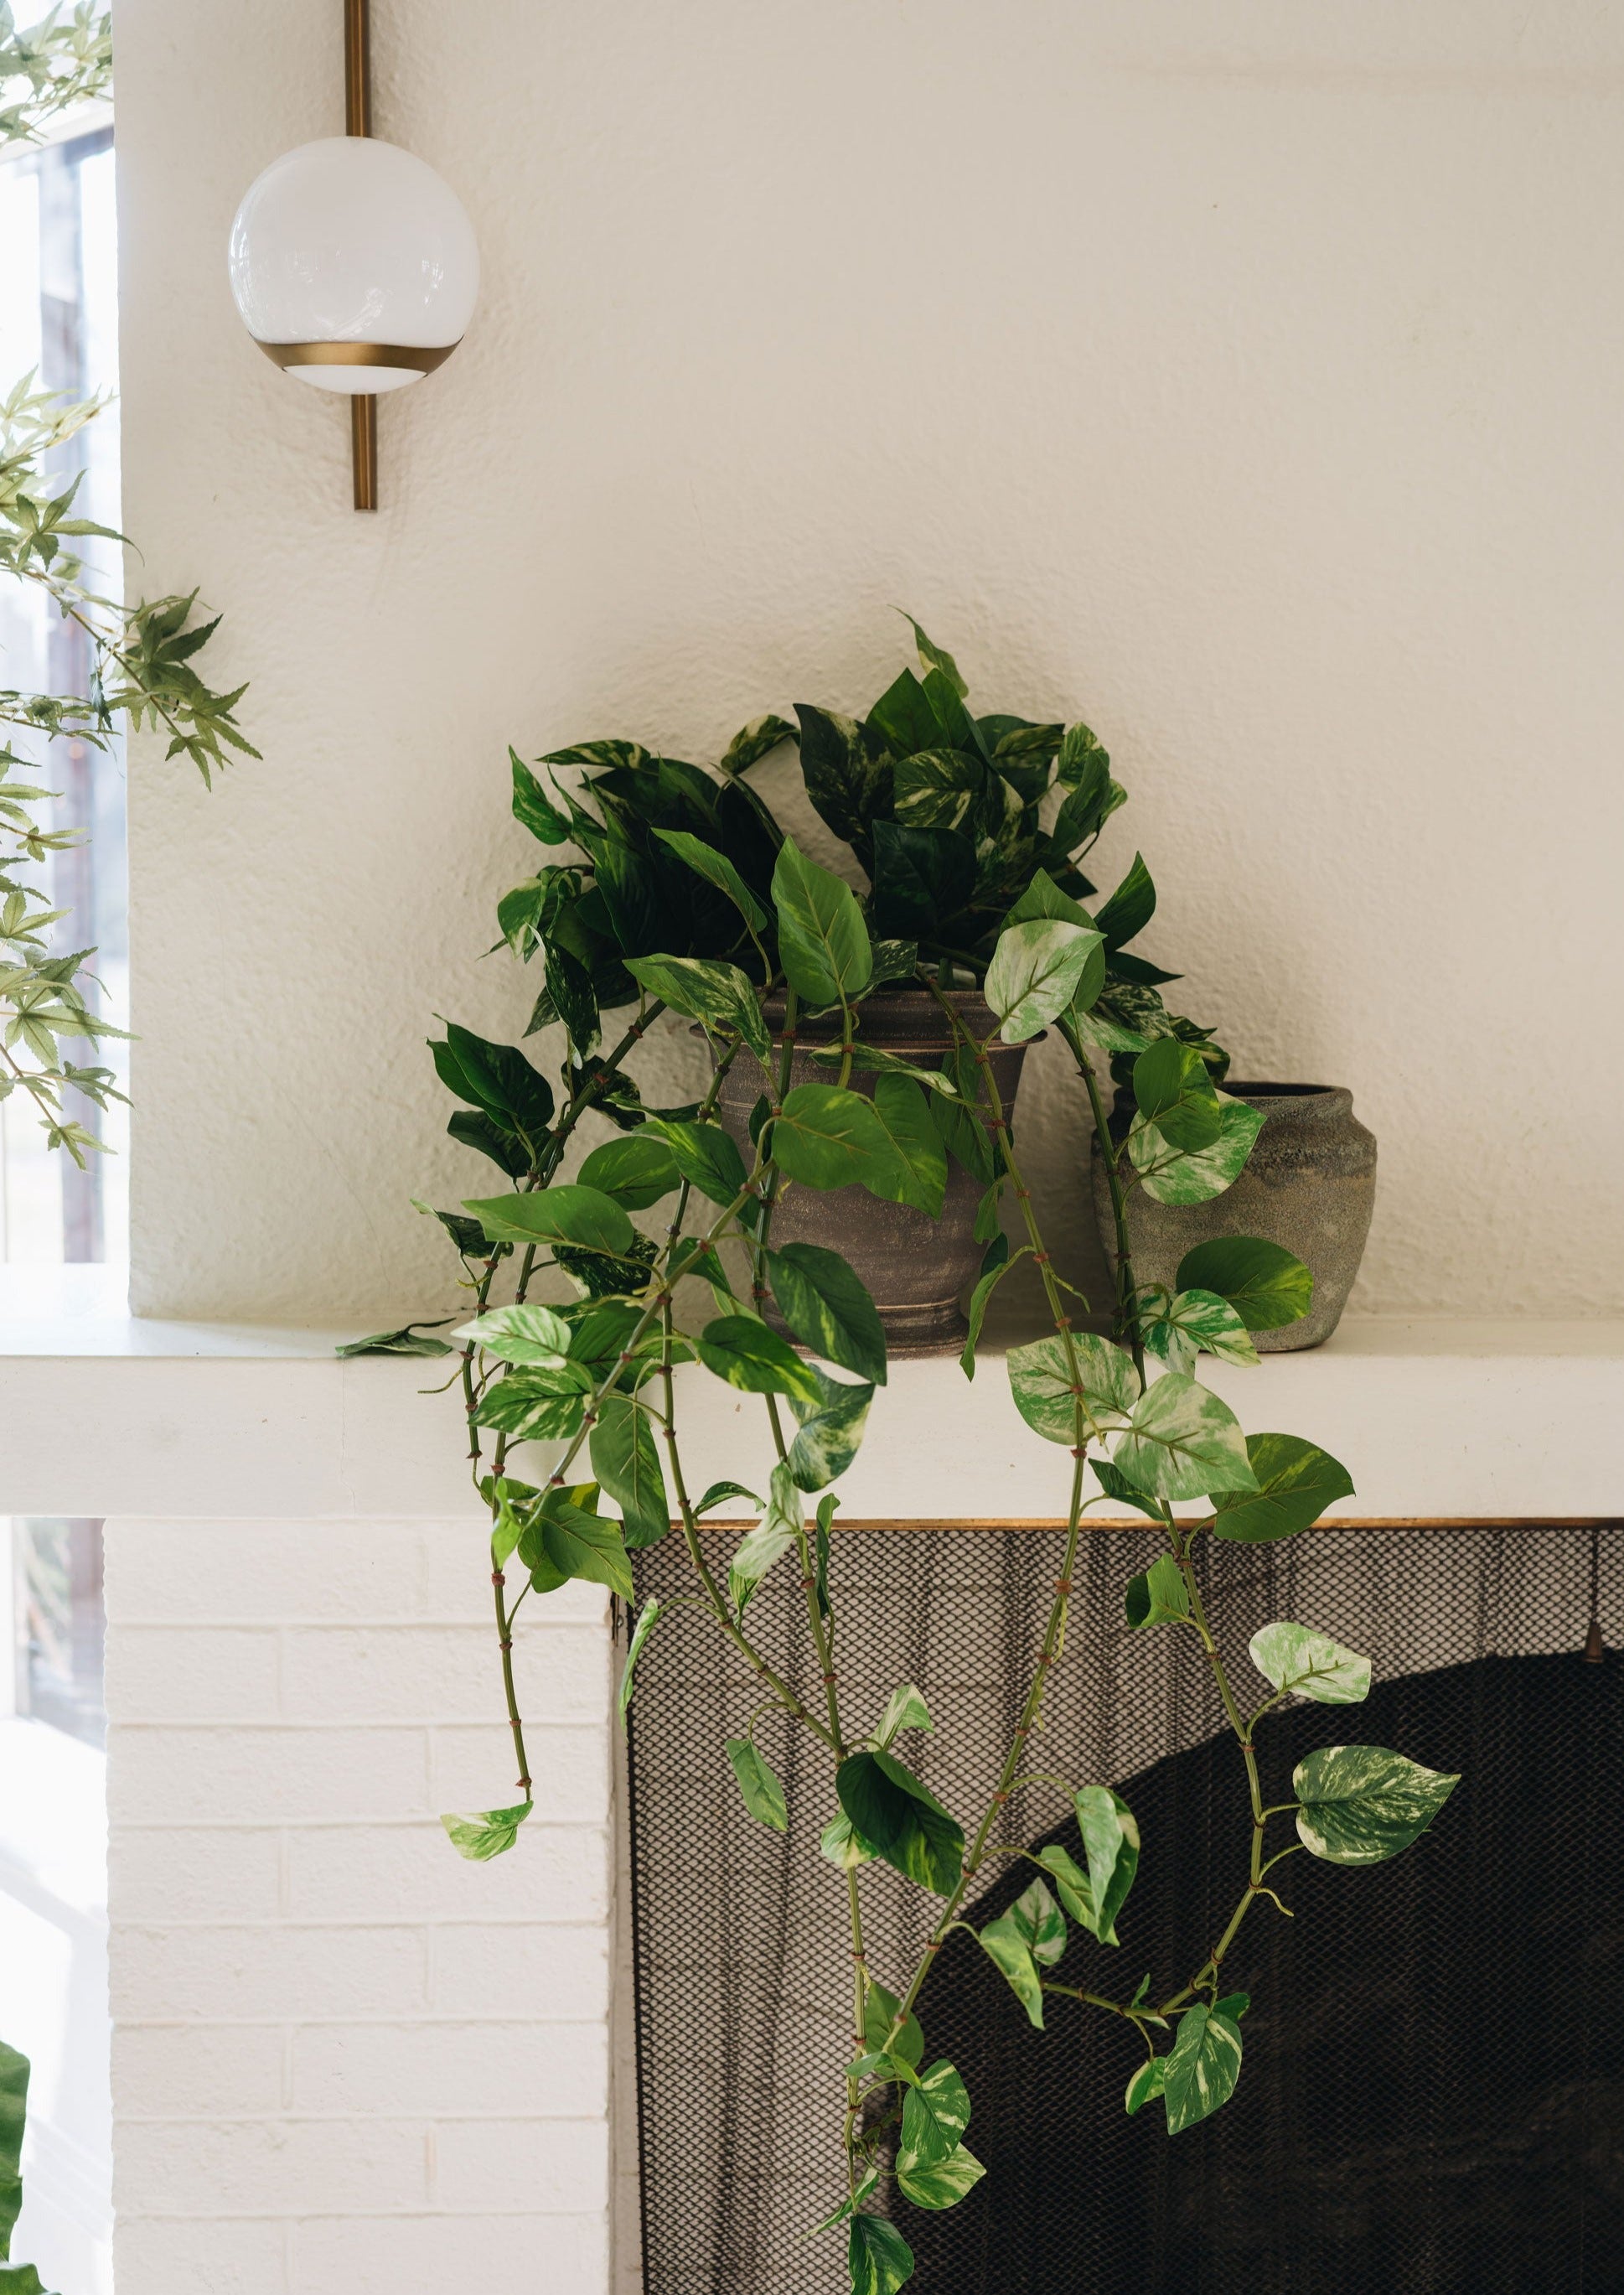 Earthy Pot on Mantel with Artificial Plants